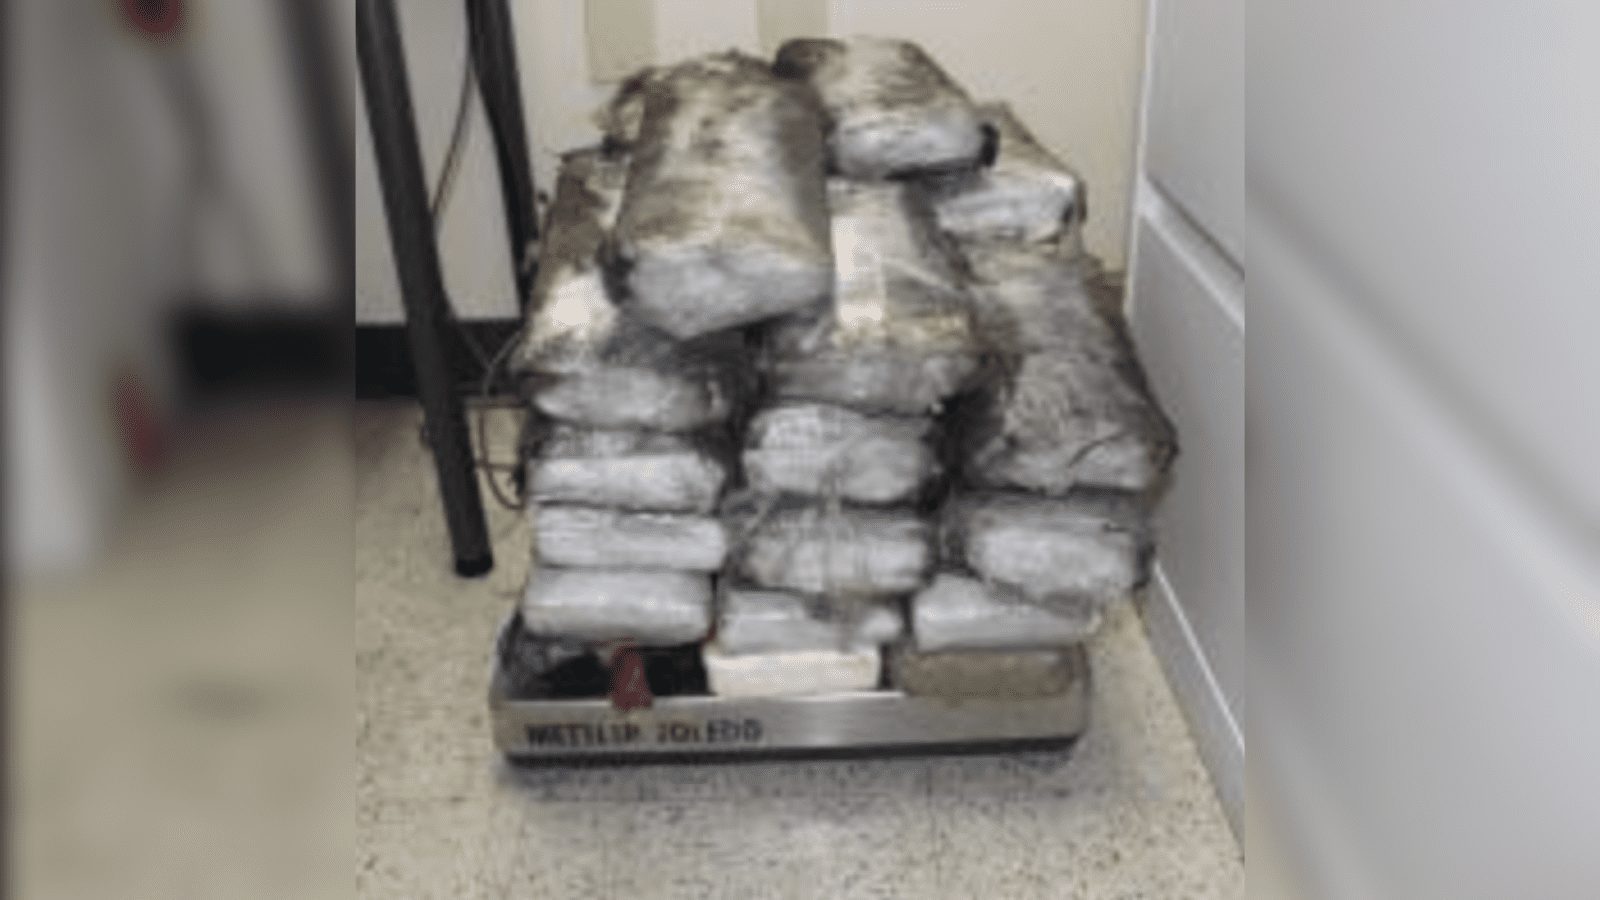 Border Patrol Seizes Over $690K of Narcotics in Texas